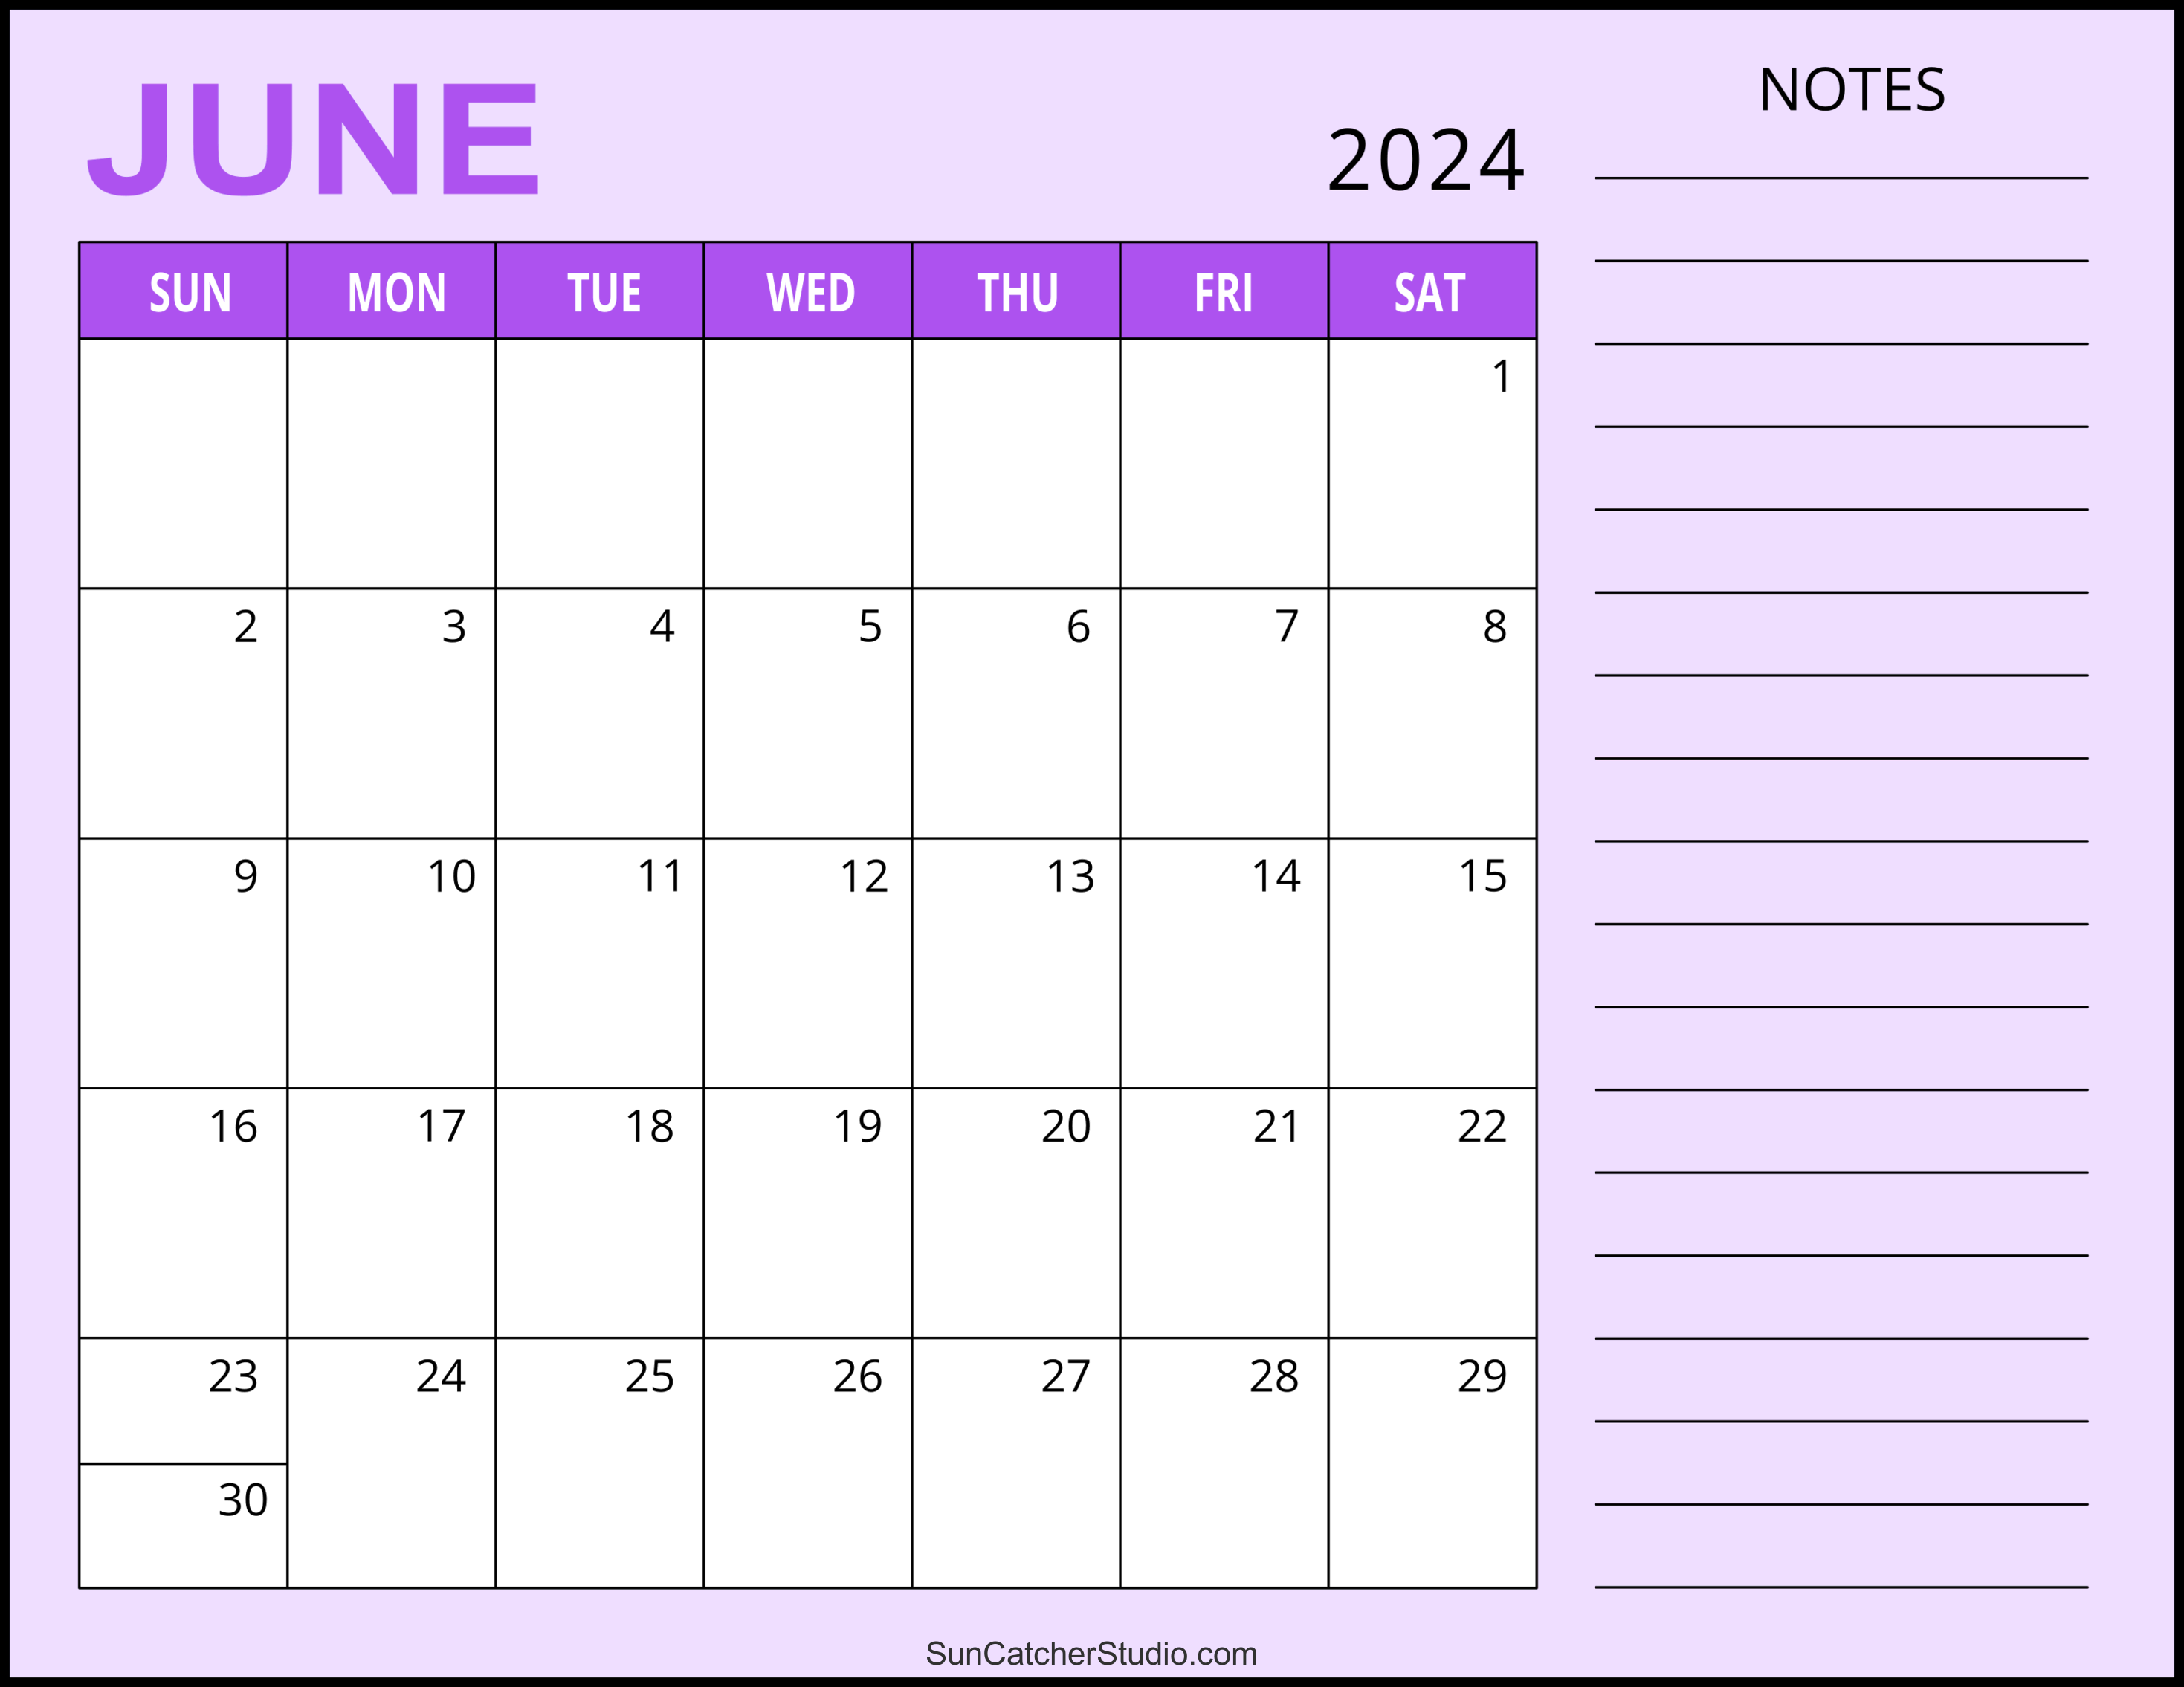 June 2024 Calendar (Free Printable) – Diy Projects, Patterns with June 2024 Calendar With Notes